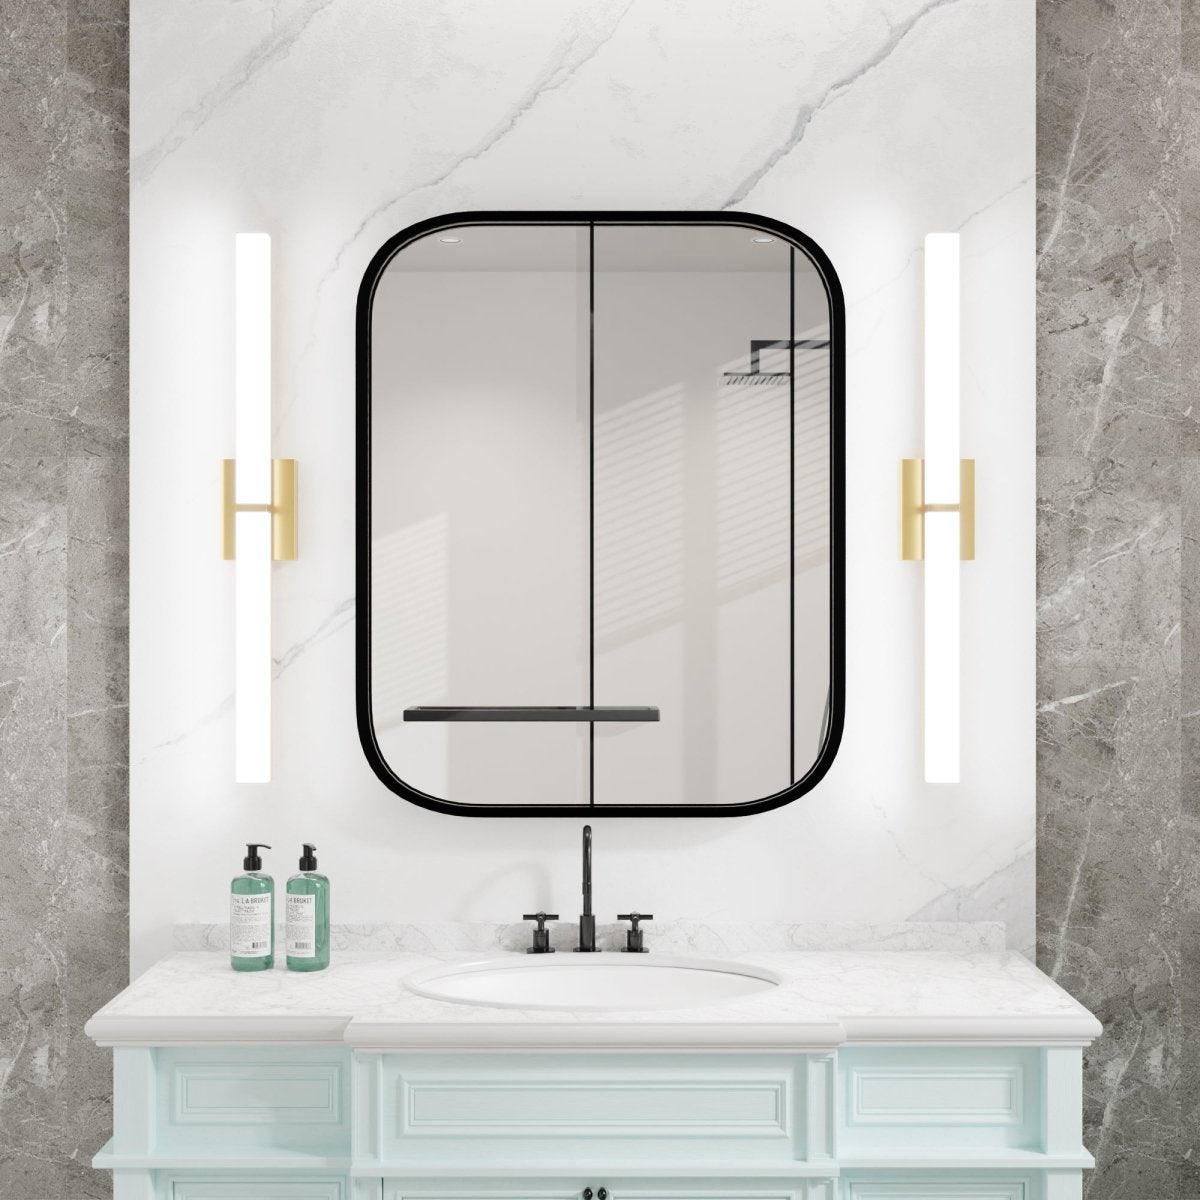 ExBrite 31.5" Sleek LED Vanity Light with Acrylic Shade, Tri-Color Temperature and Stepless Dimming, ETL-Certified, Gold